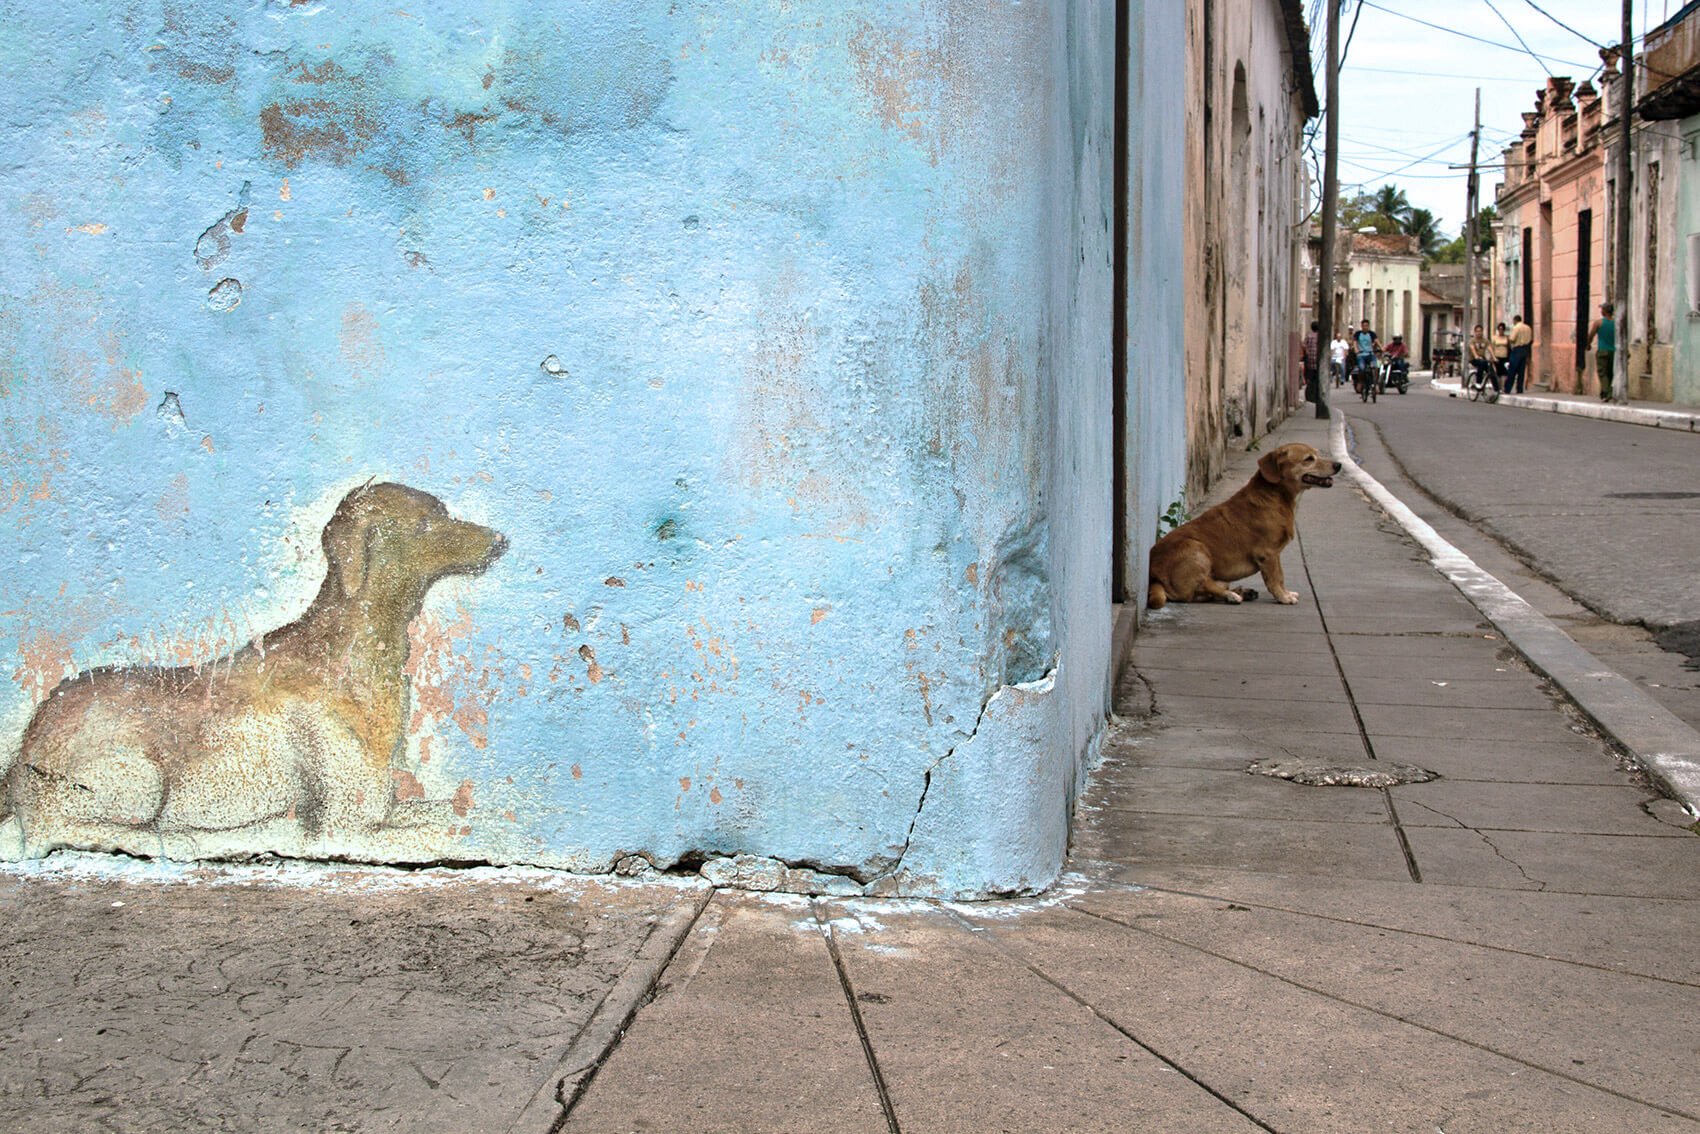 A doggy and his painted alter ego in Camagüey